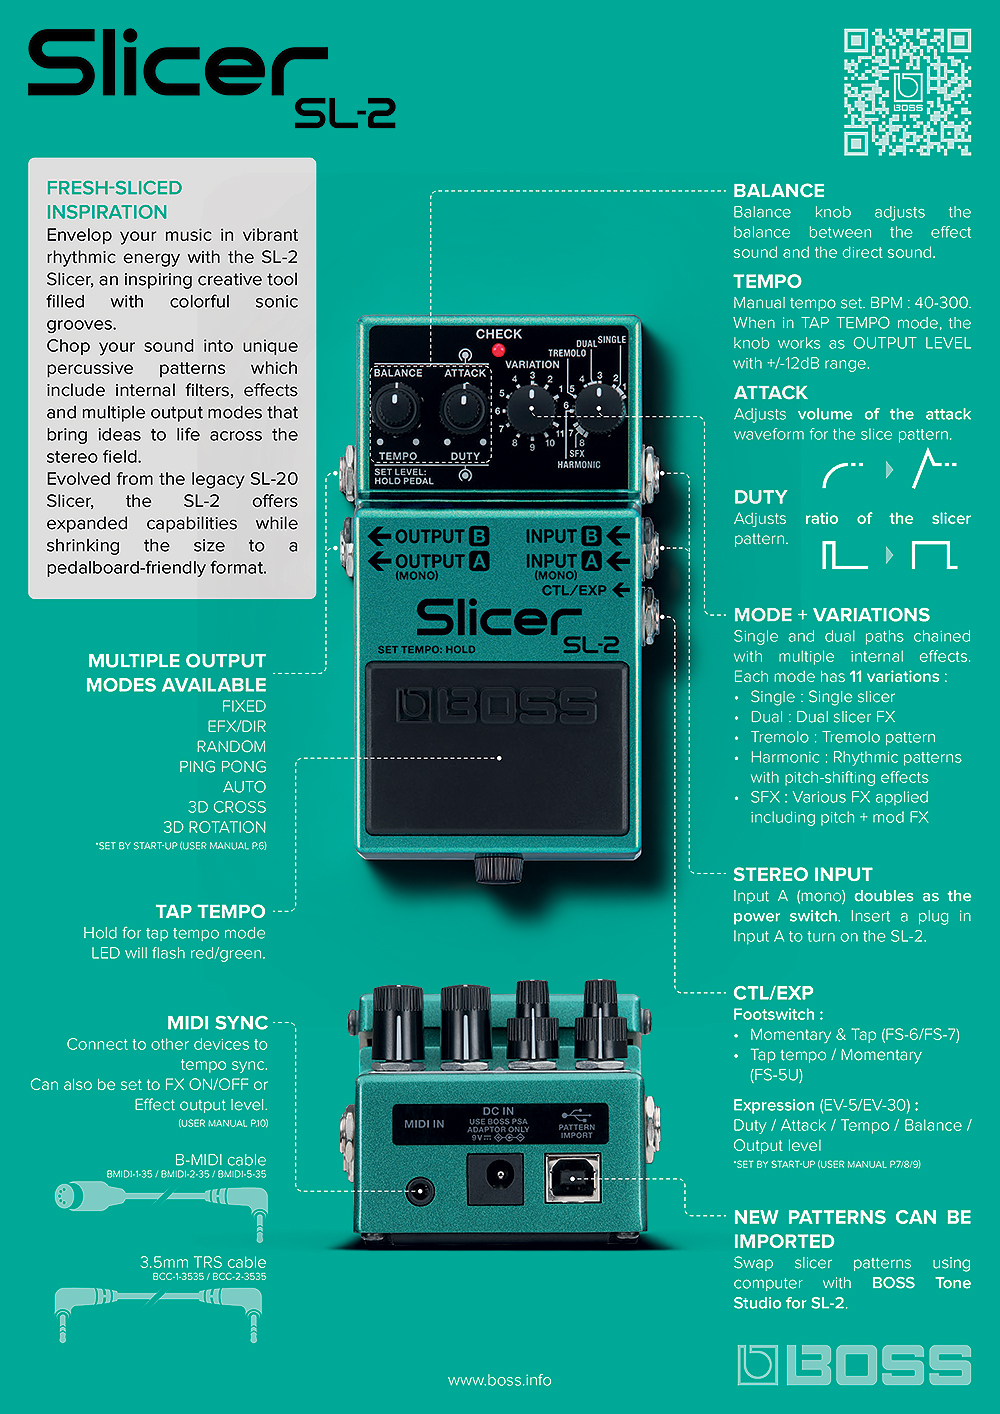 Guitar Pedal X - News - Boss Revives and Shrinks its Slicer Audio